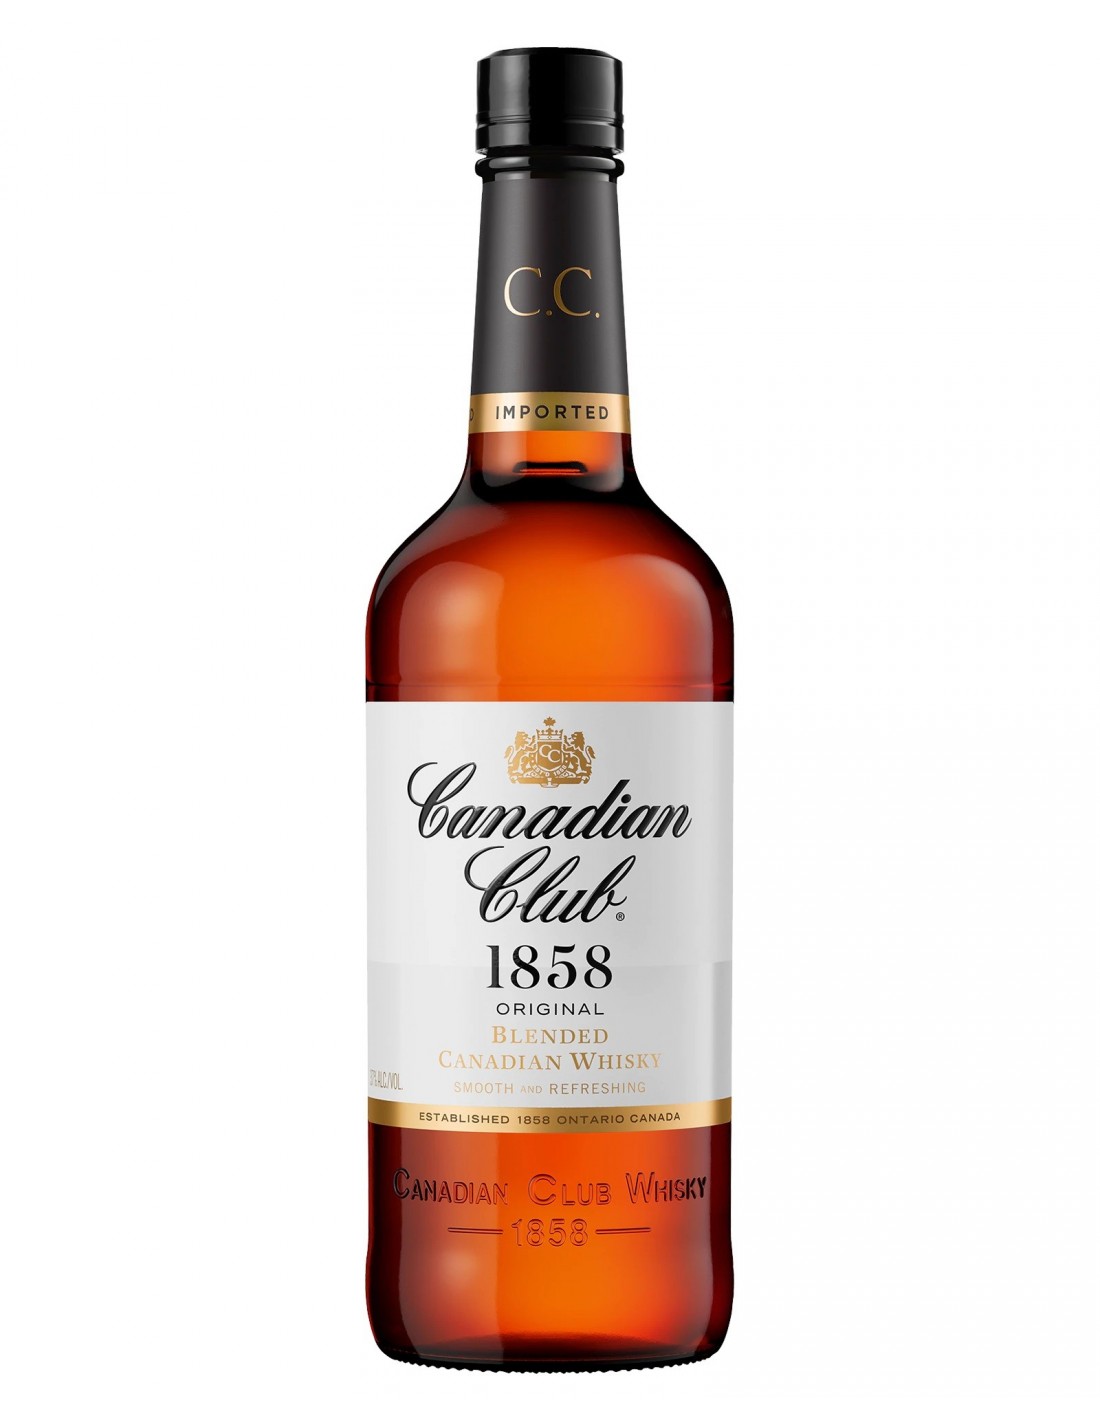 Whisky Canadian Club 1L, 40% alc., Canada alcooldiscount.ro